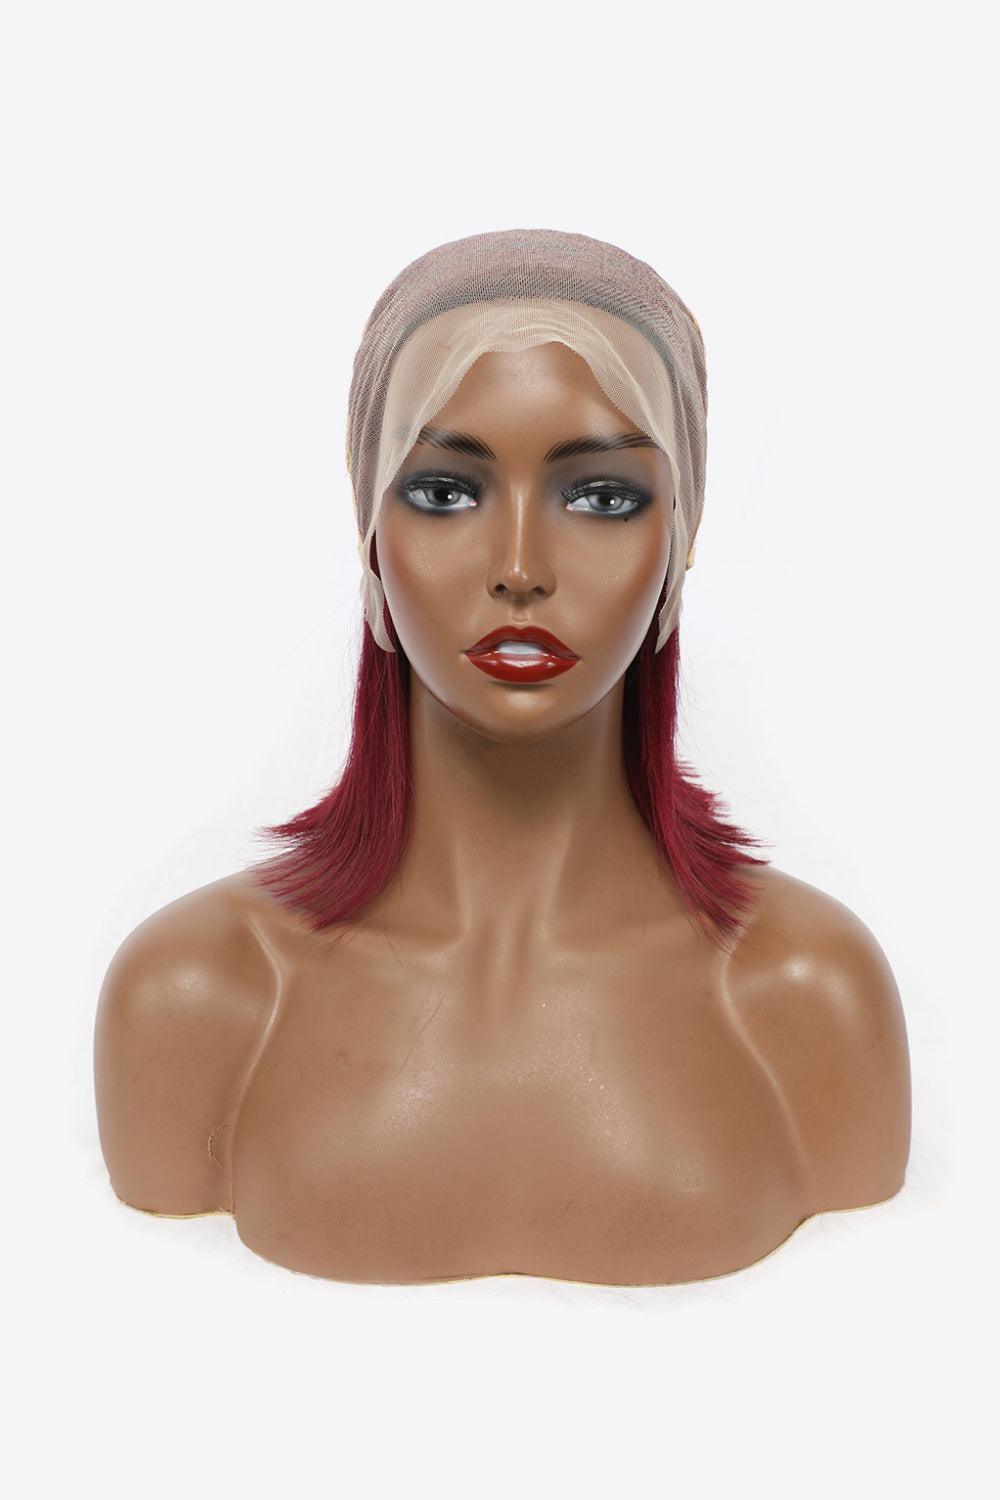 a mannequin head with red hair and a turban